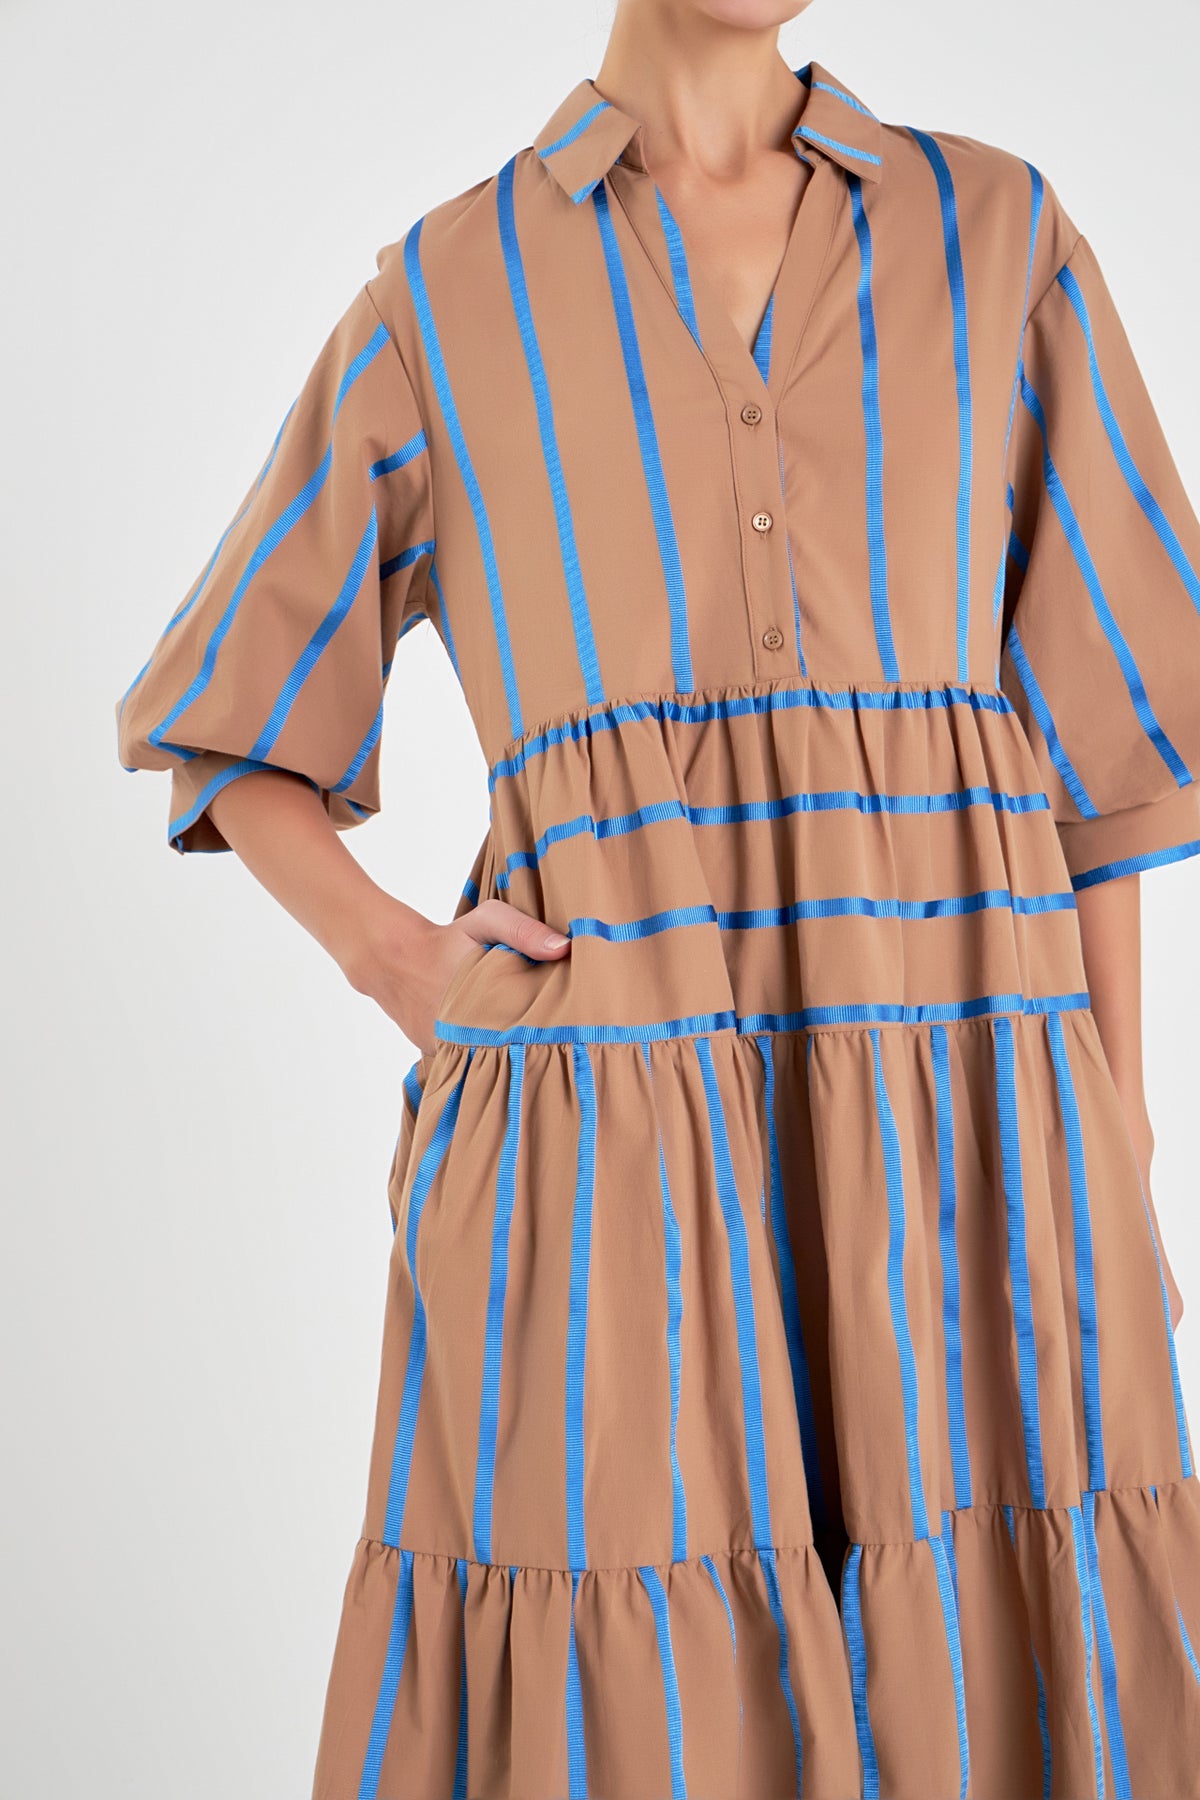 ENGLISH FACTORY - Striped Collared Midi Dress - DRESSES available at Objectrare